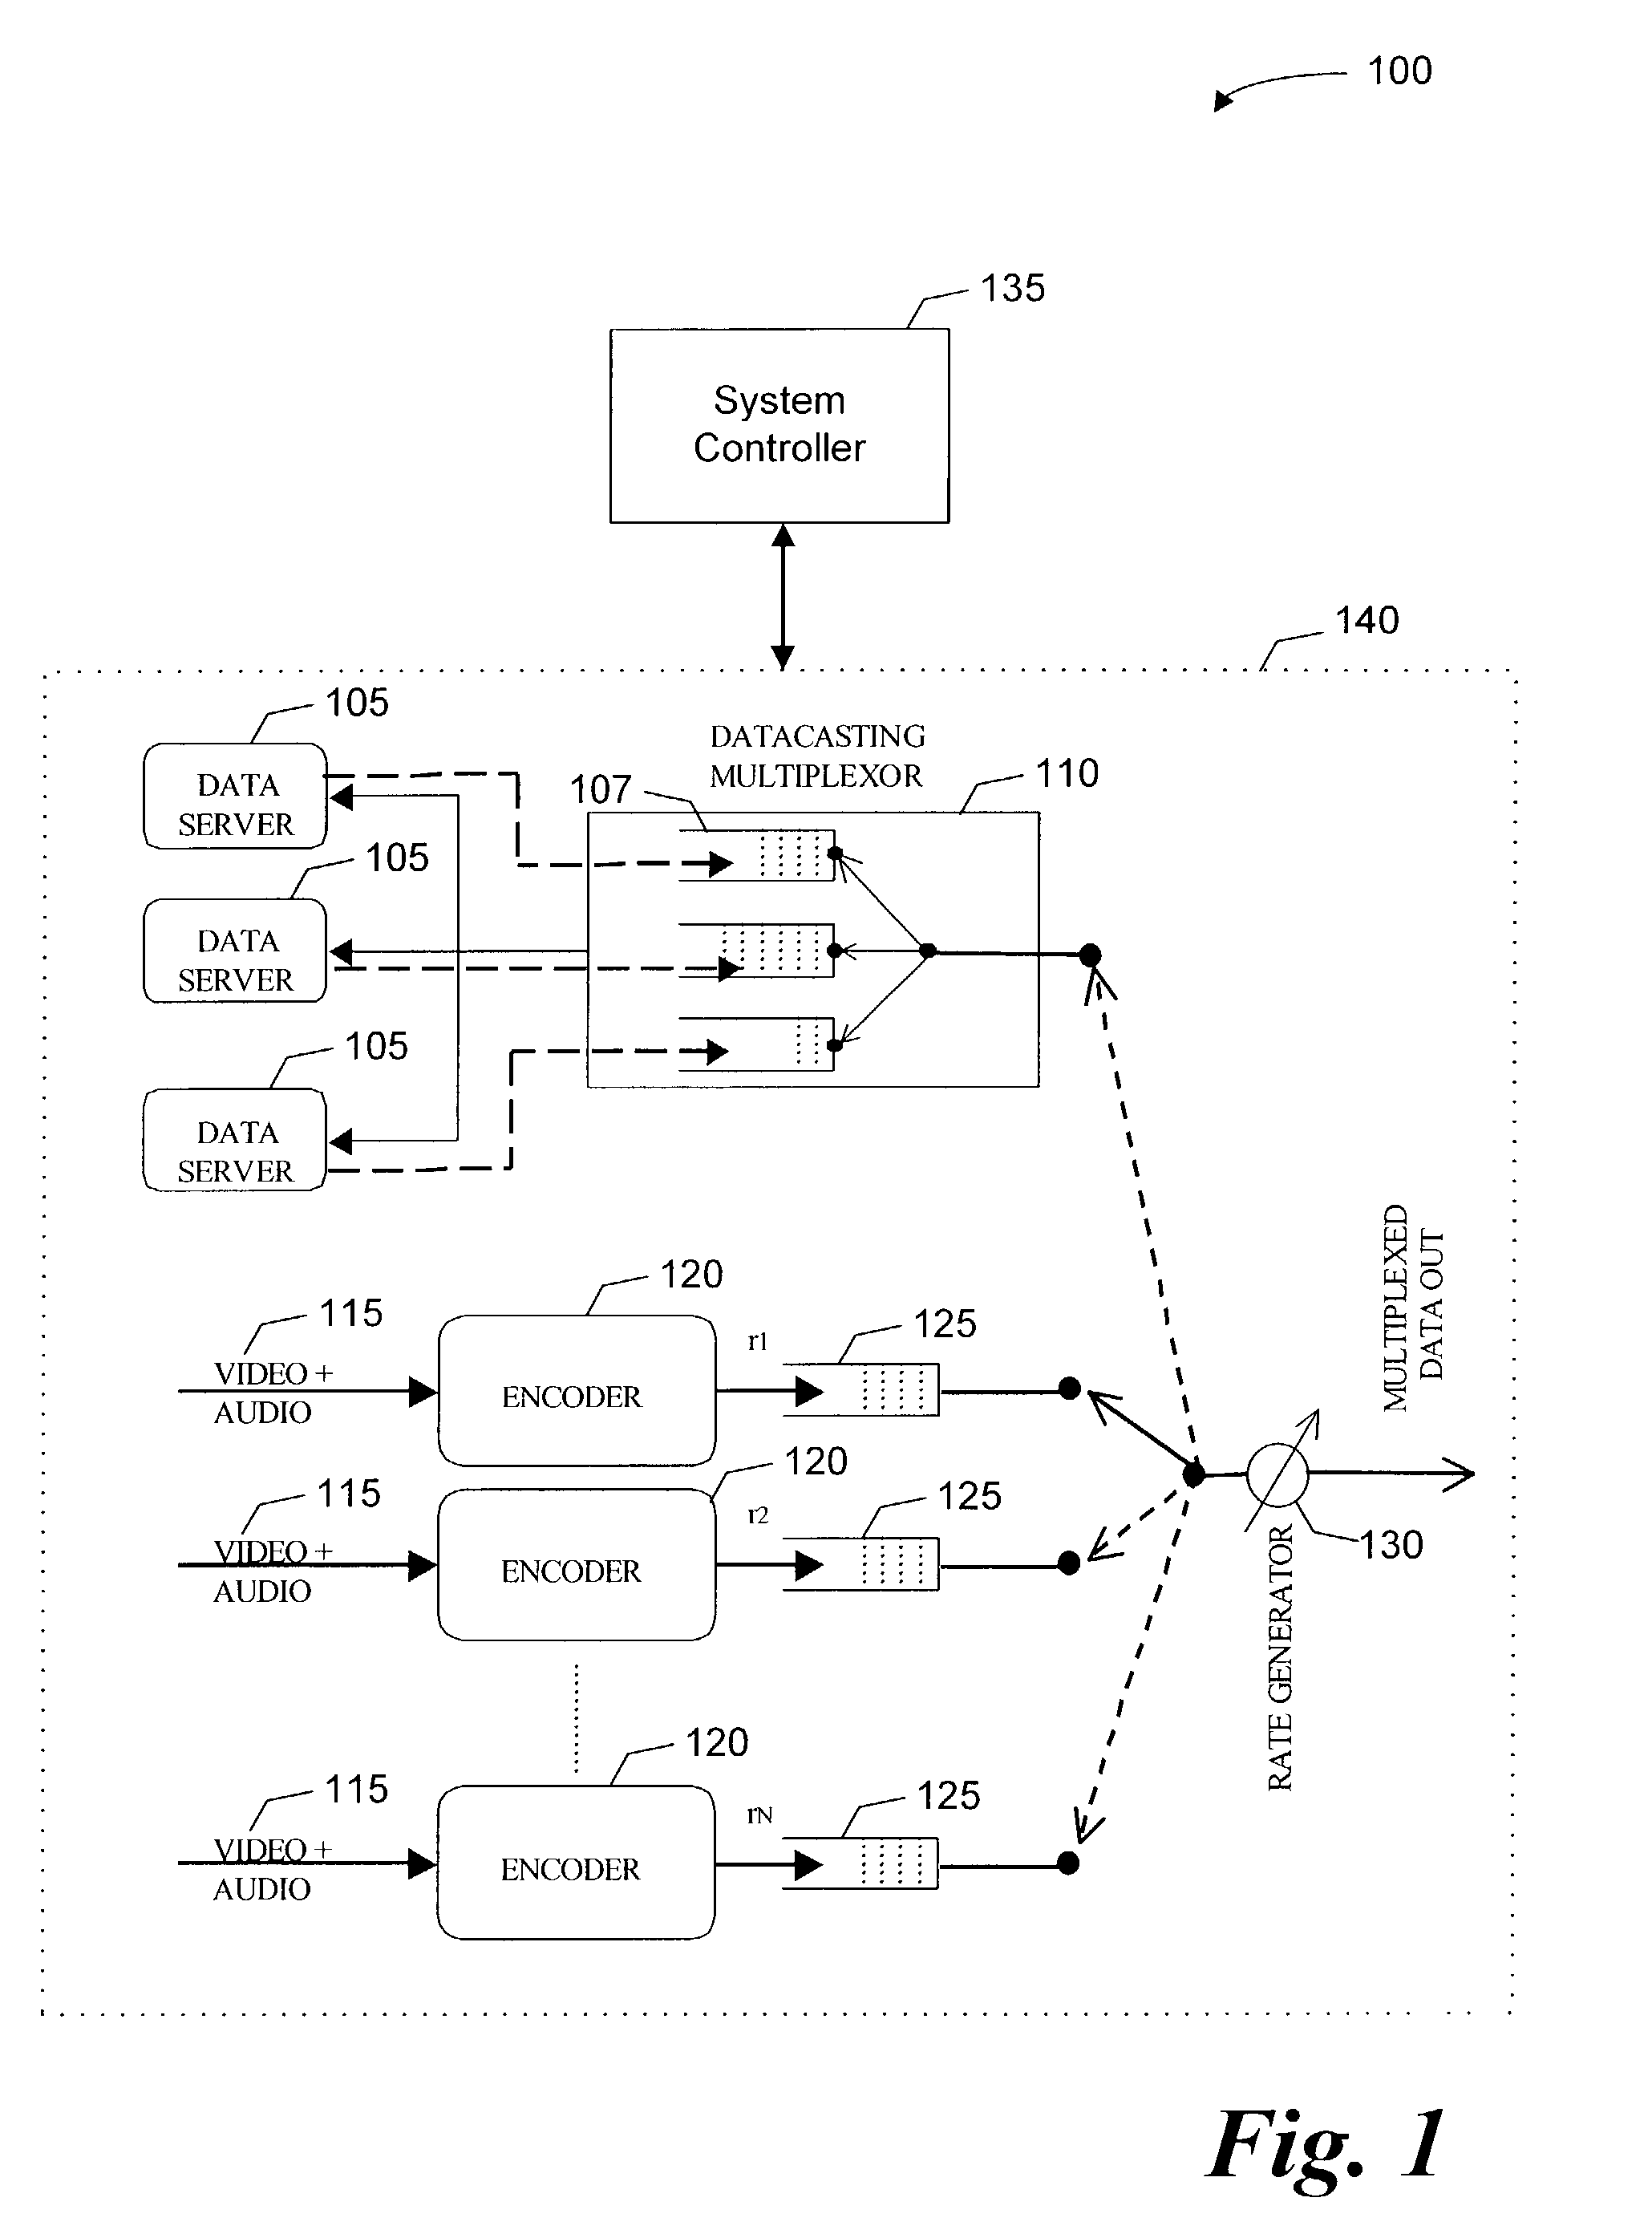 Systems and methods for providing on-demand datacasting